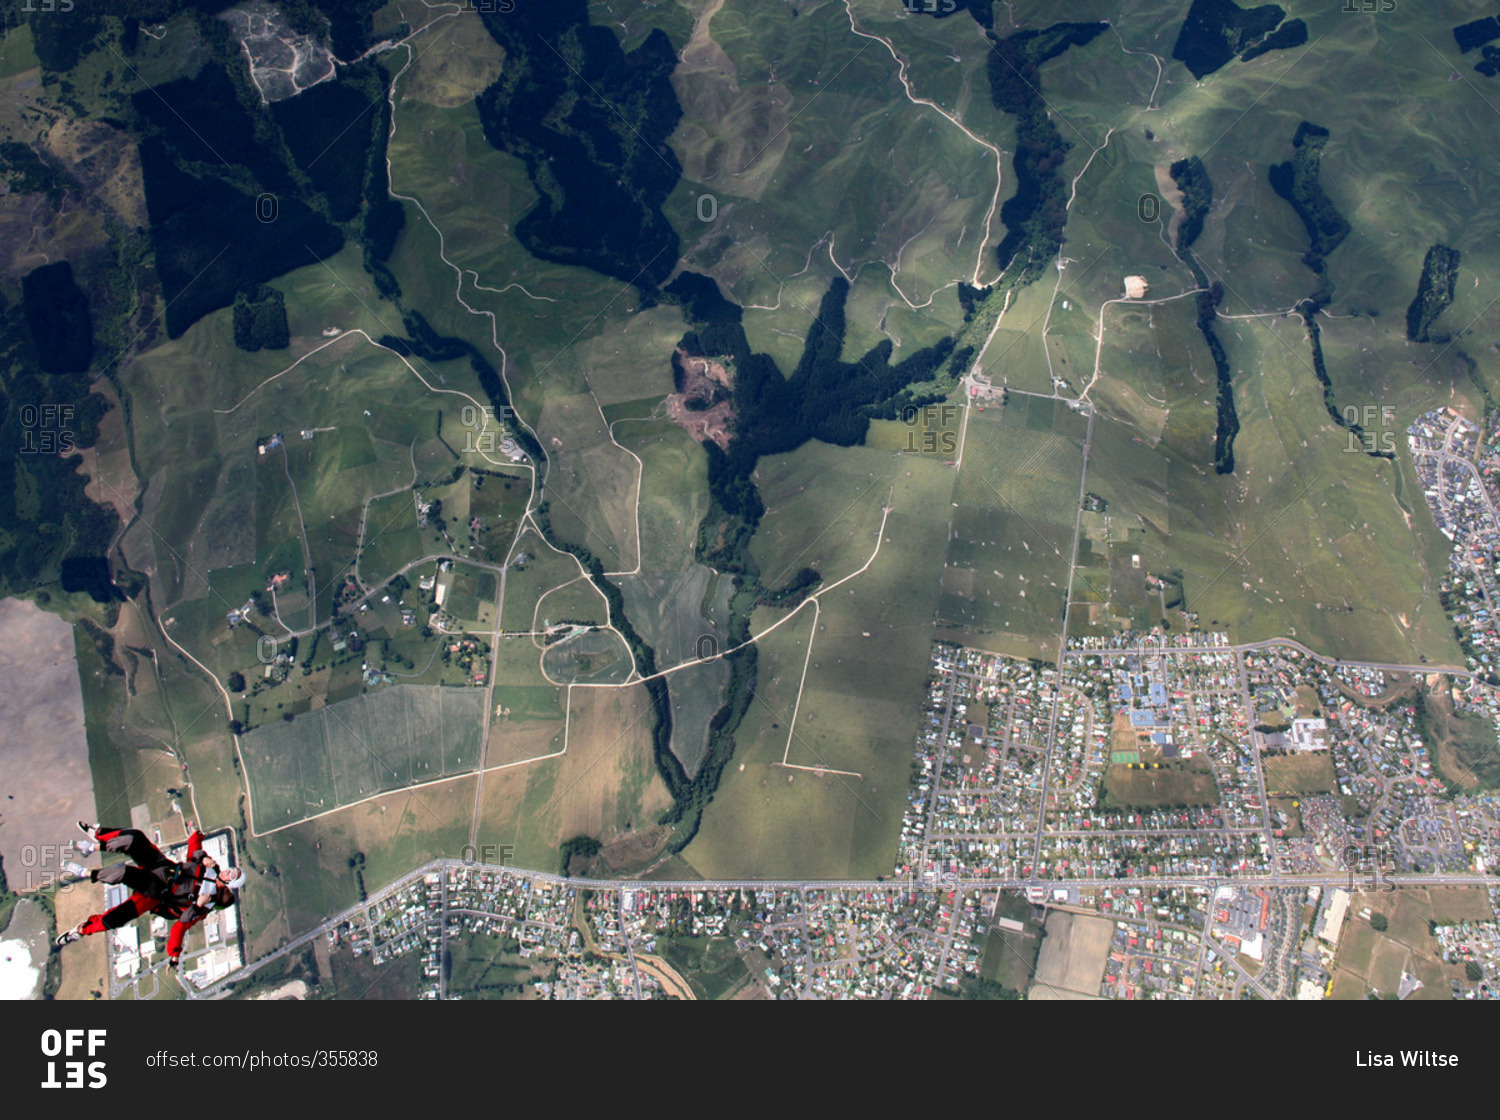 Skydivers over a patchwork of fields and neighborhoods near Rotorua, New Zealand